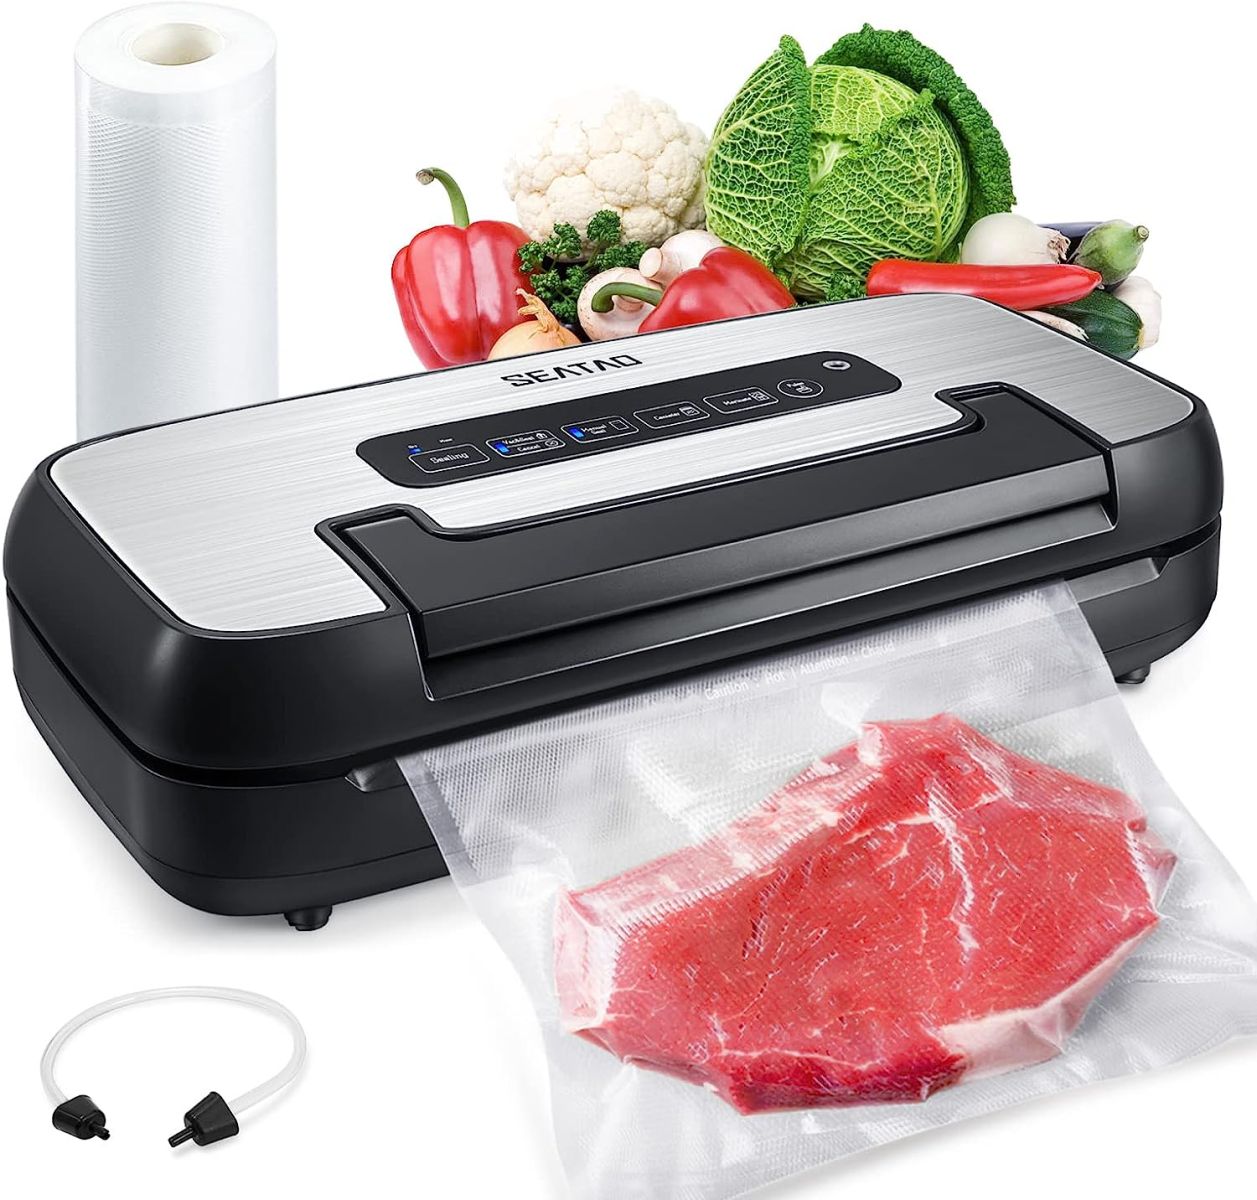 VH5156 Vacuum Sealer, Handle Lock Design, Over 200 Continuous Uses Without Overheating, 80kpa Multifunctional Commercial and Home Vacuum Food Sealer Vacuum Sealers with Built-In Roll Storage and Cutter Starter Kit